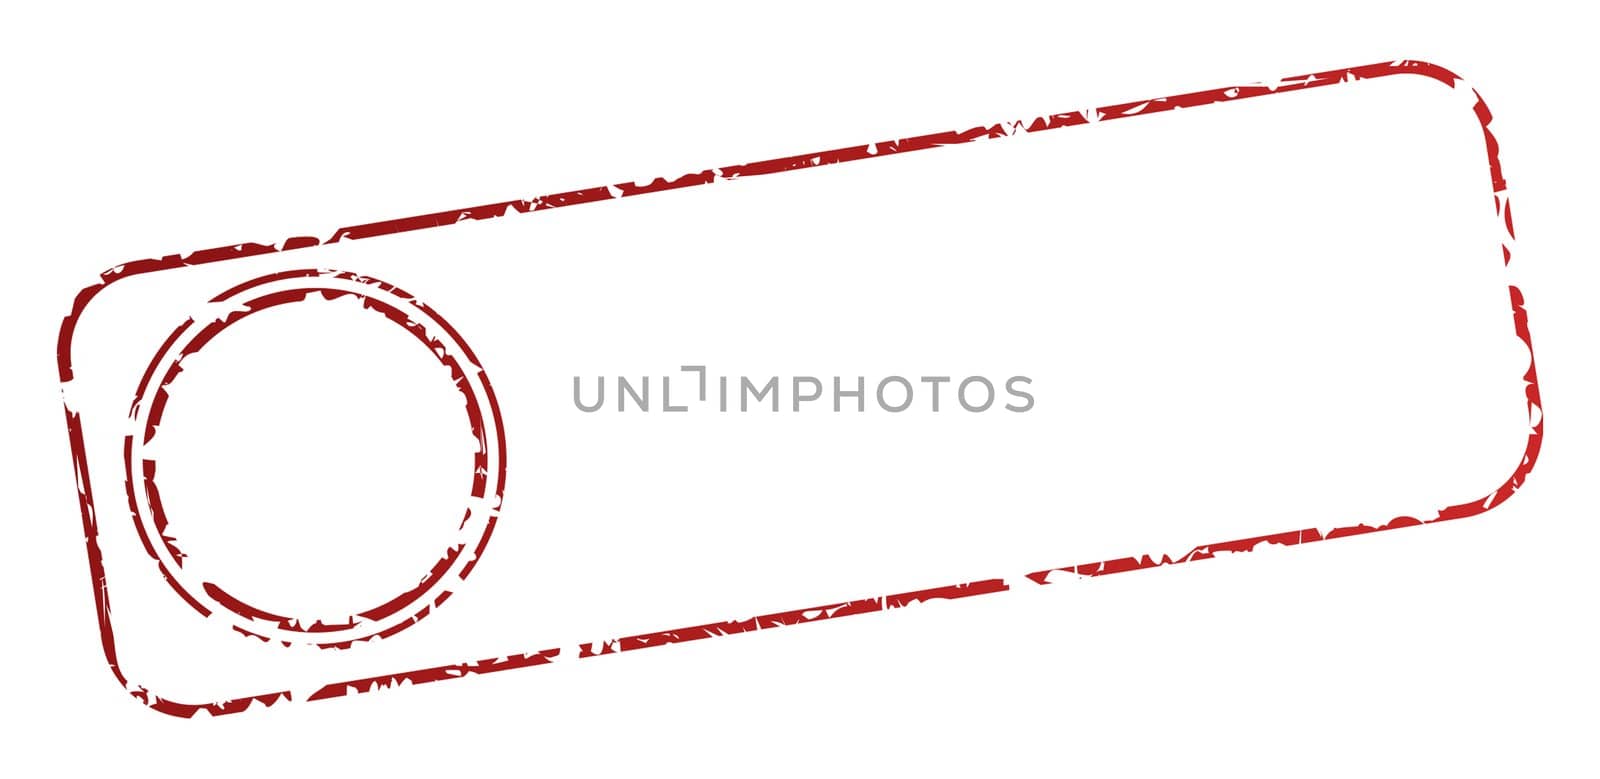 Blank business stamp with copy space, isolated on white background.